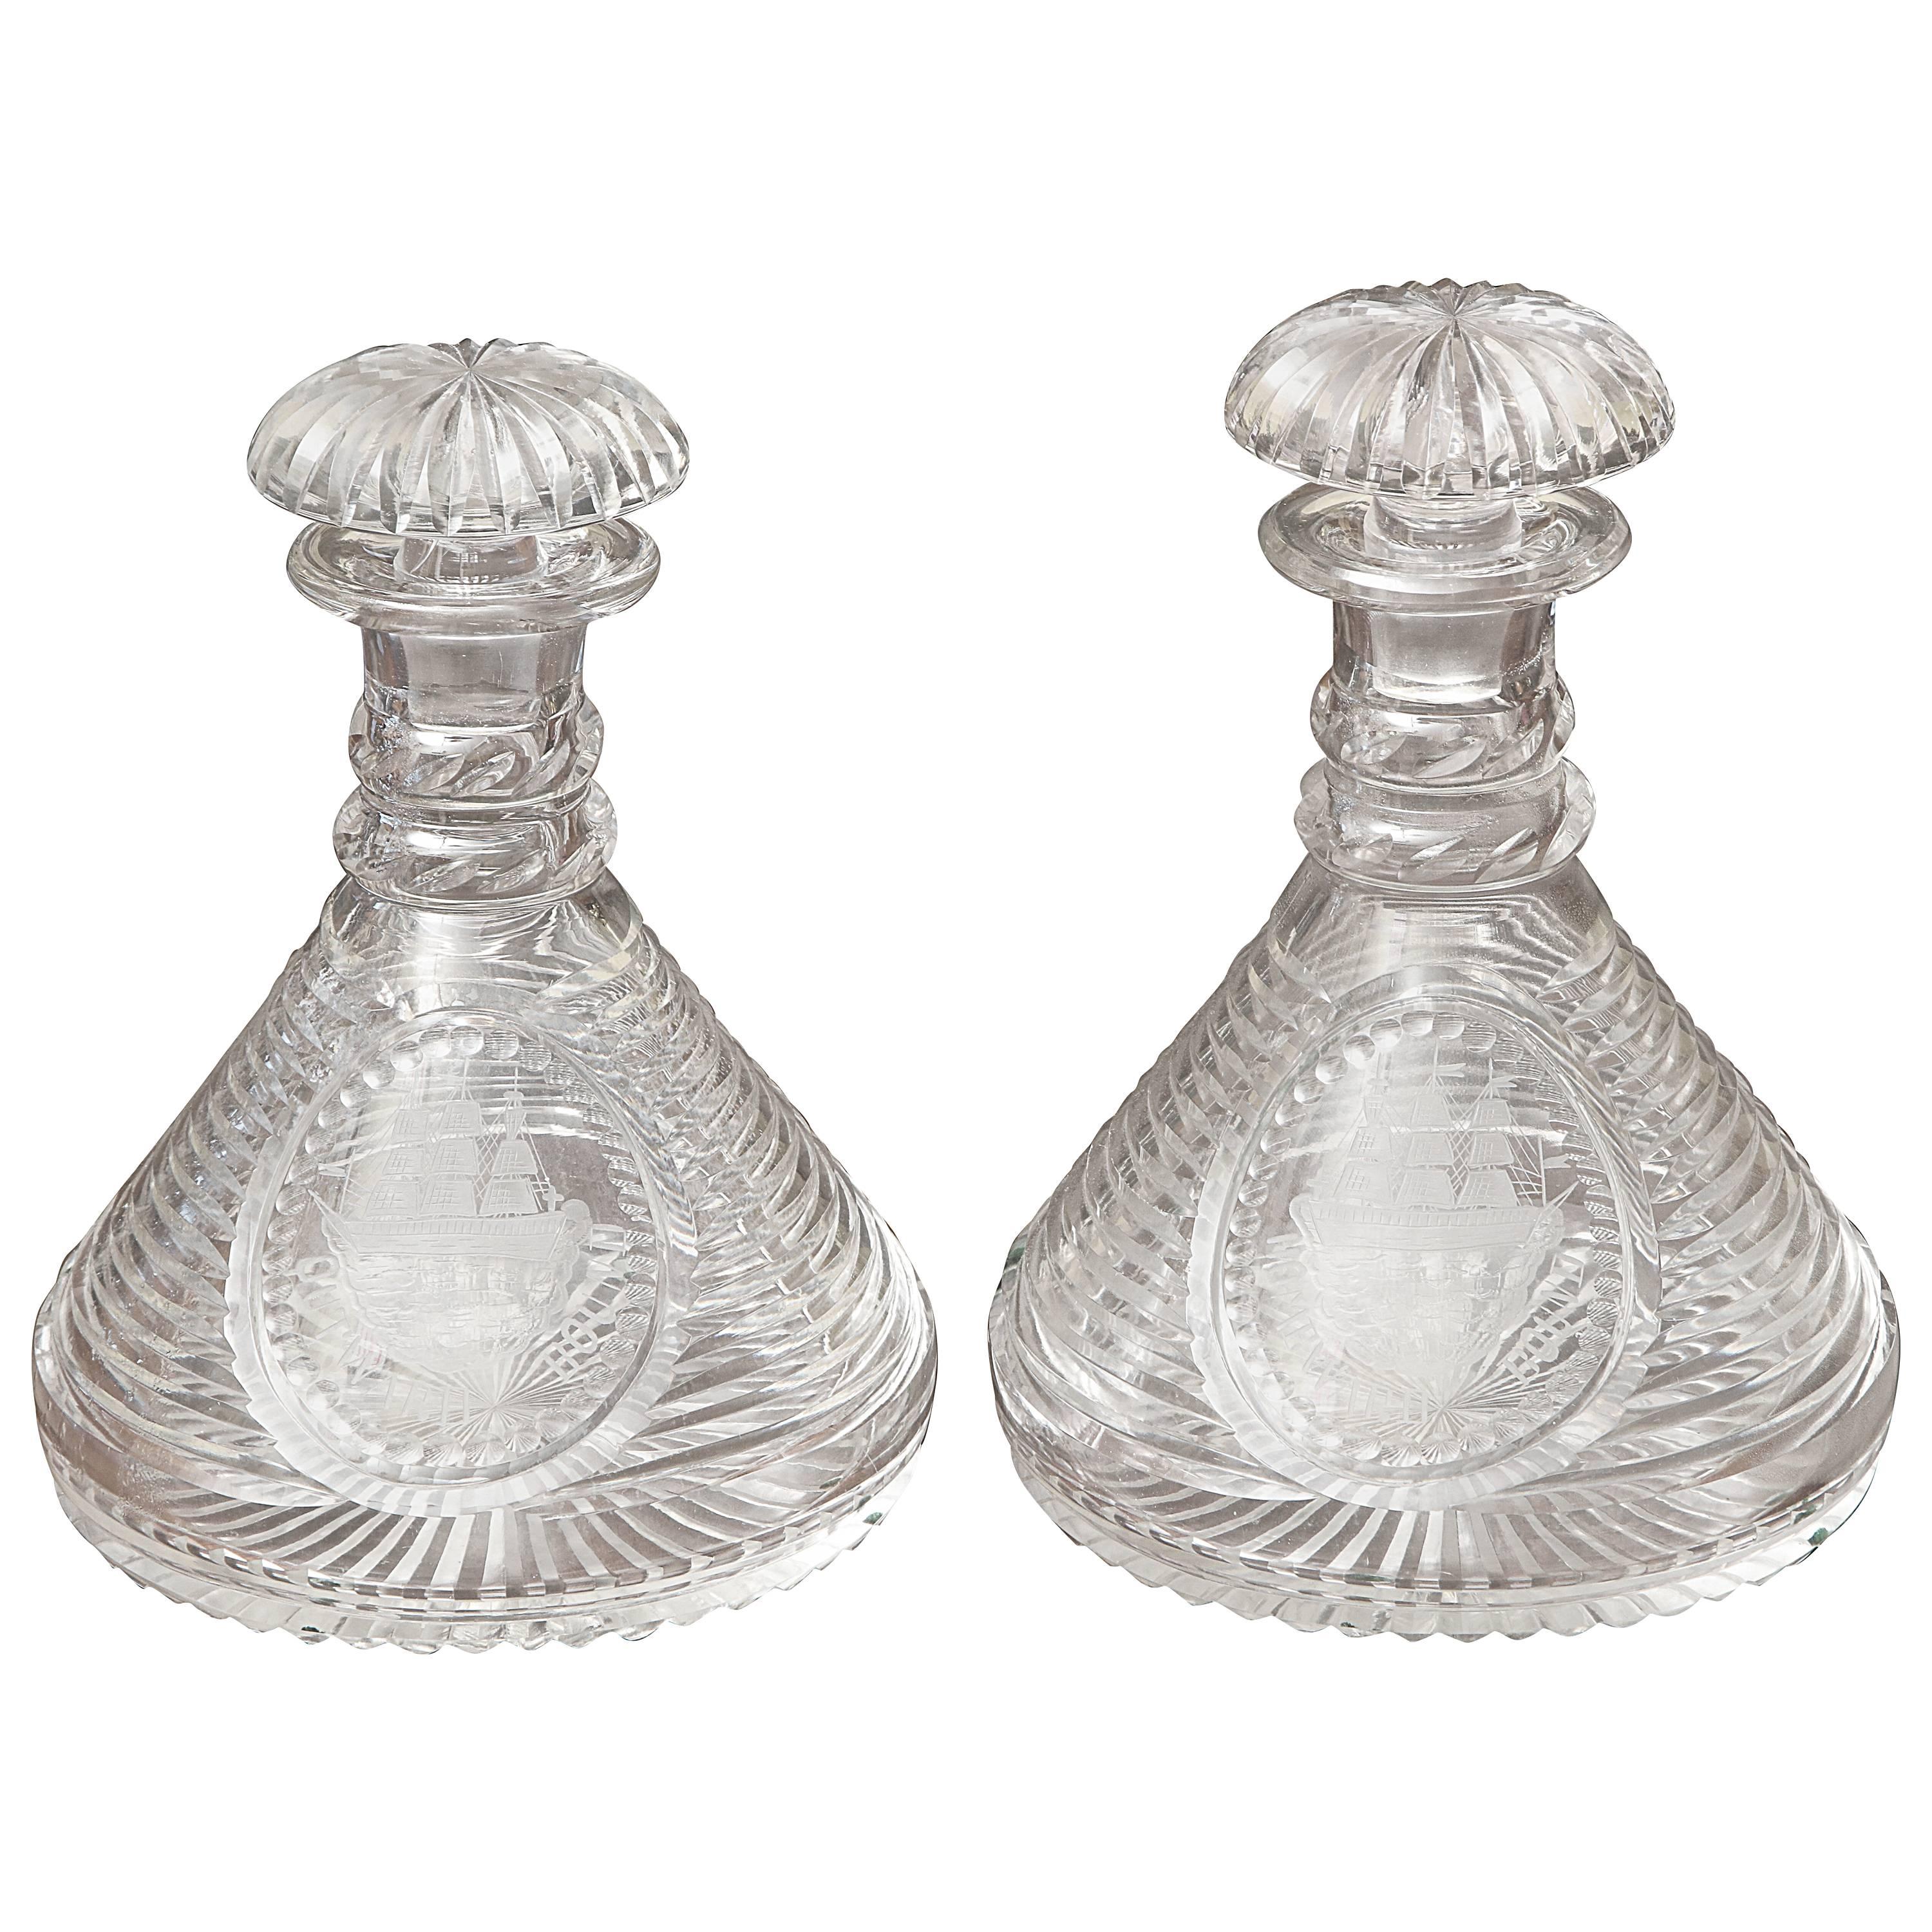 Pair of Finely Cut Crystal and Engraved Ship's Decanters, English, circa 1875 For Sale